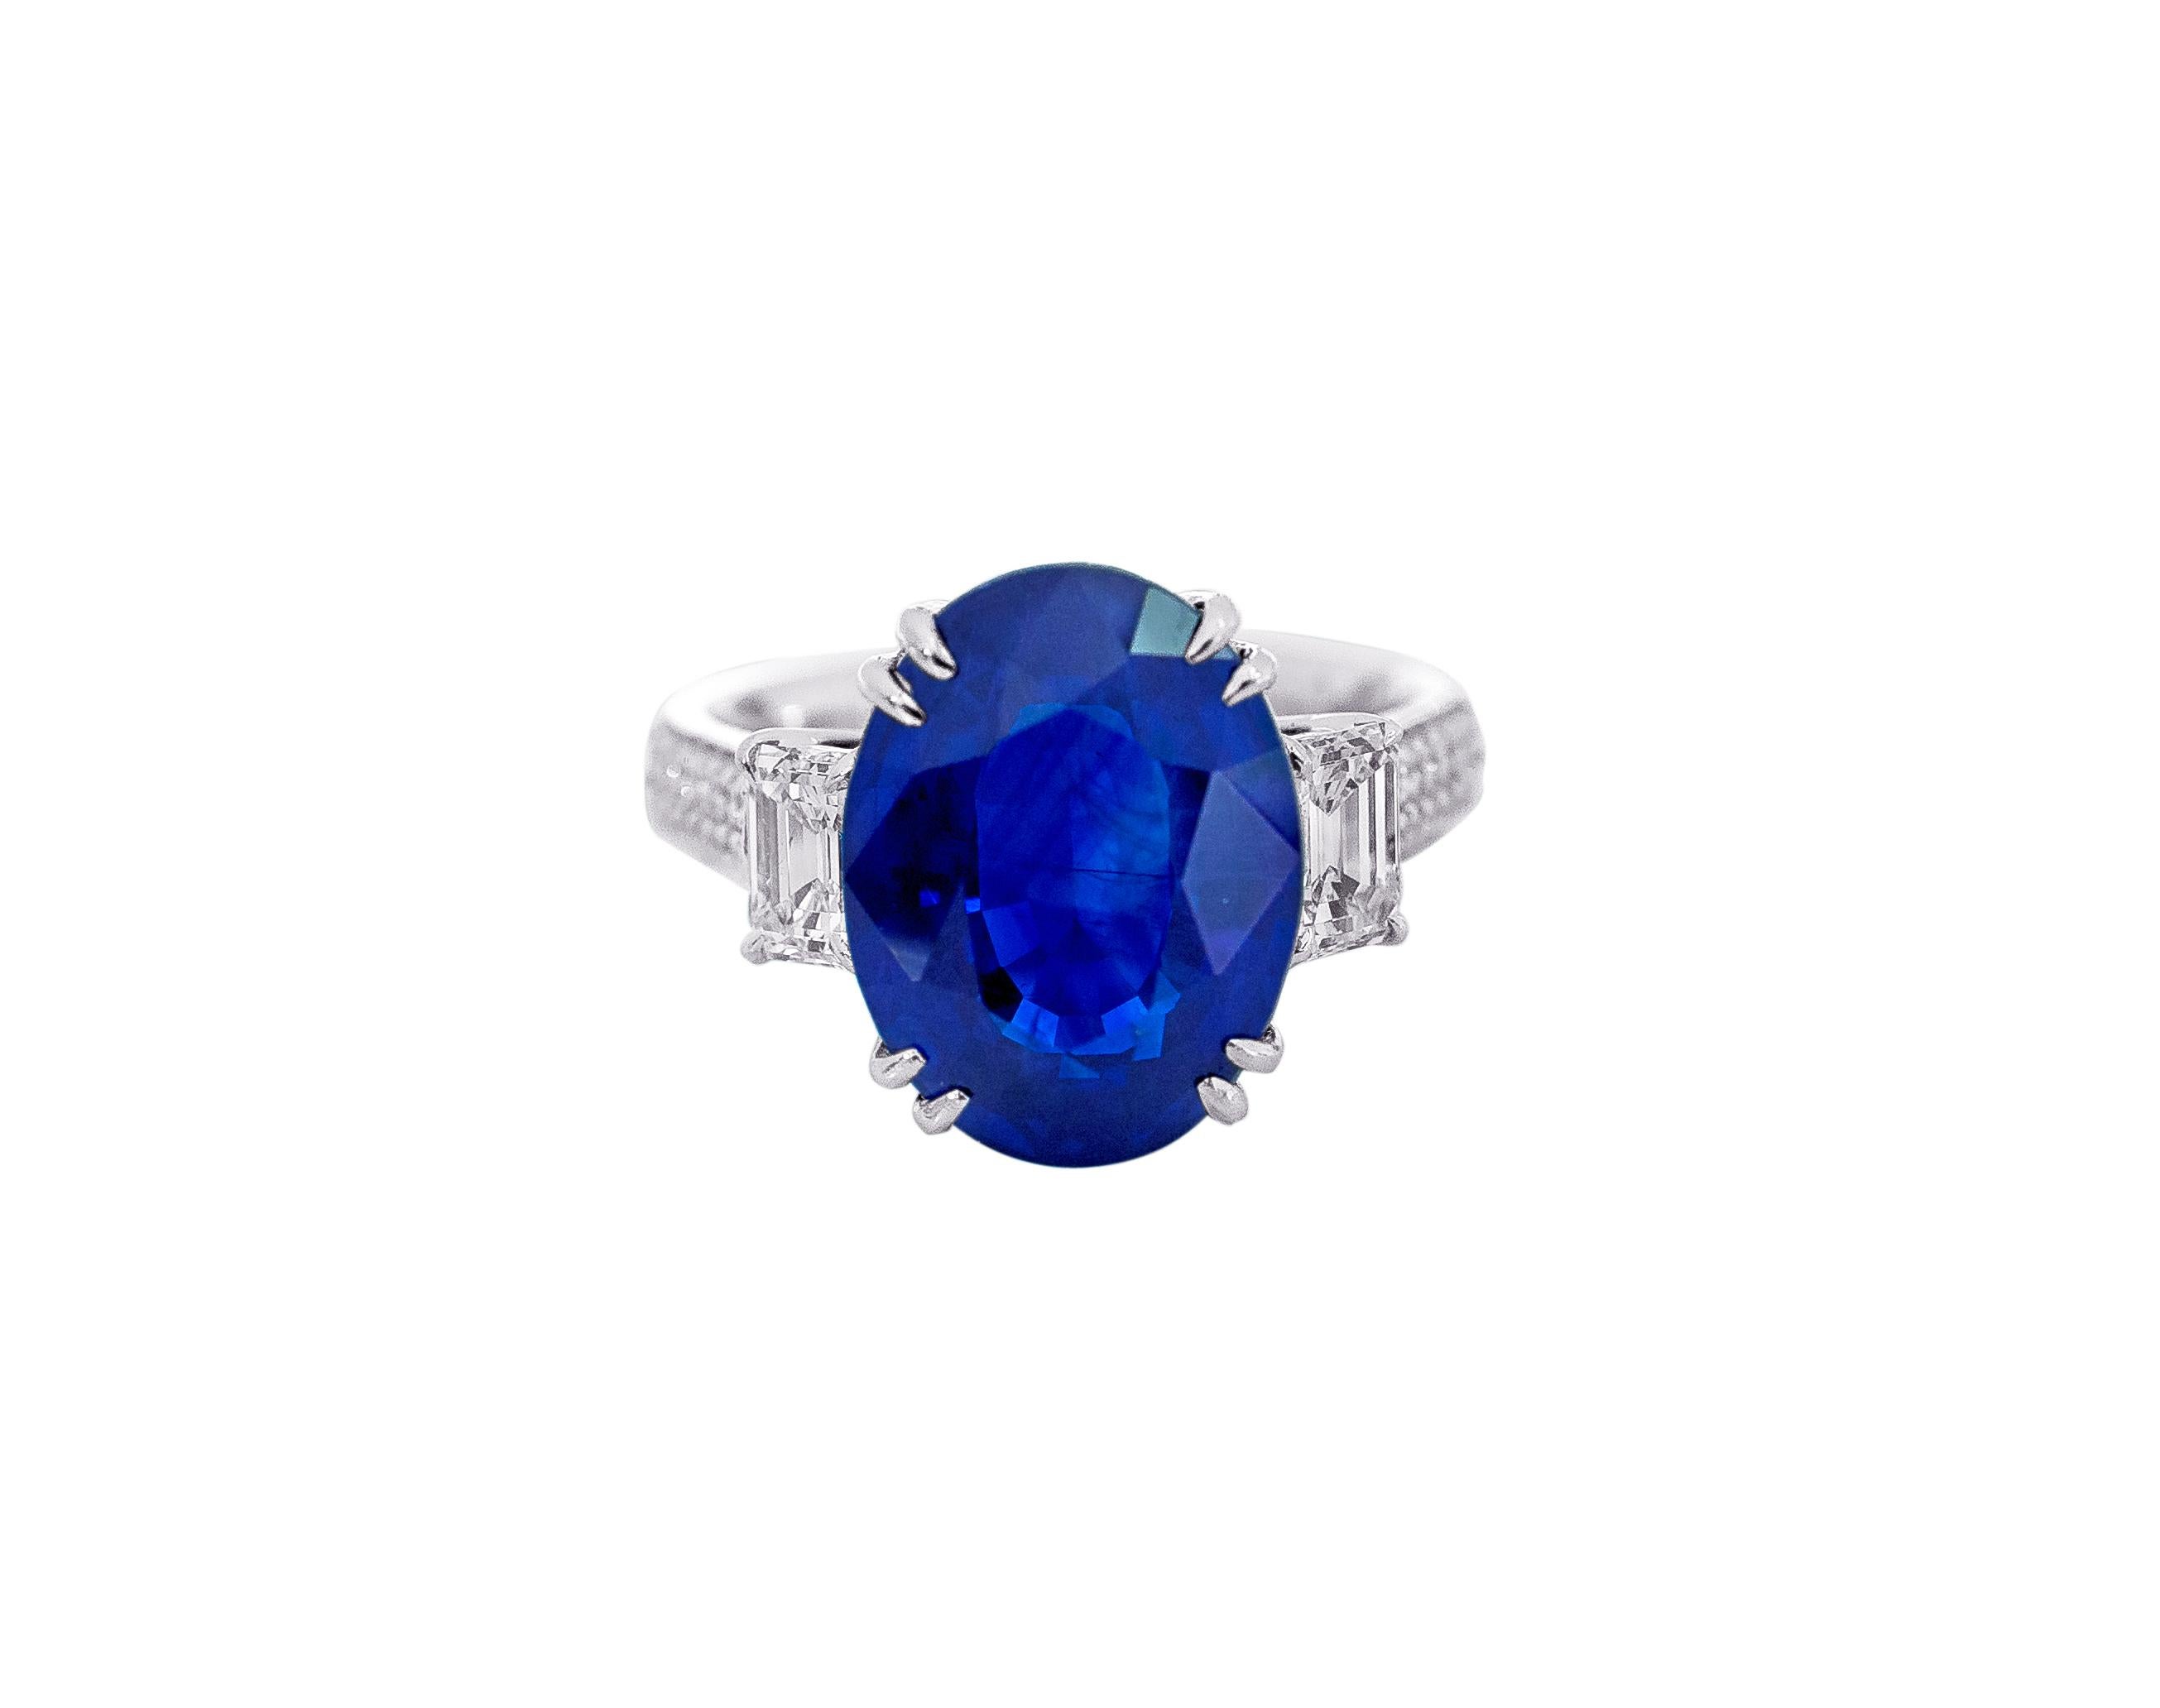 GIA Certified 8.90 Carat Royal Blue Sapphire Cocktail Ring in 18 Karat Gold For Sale 3